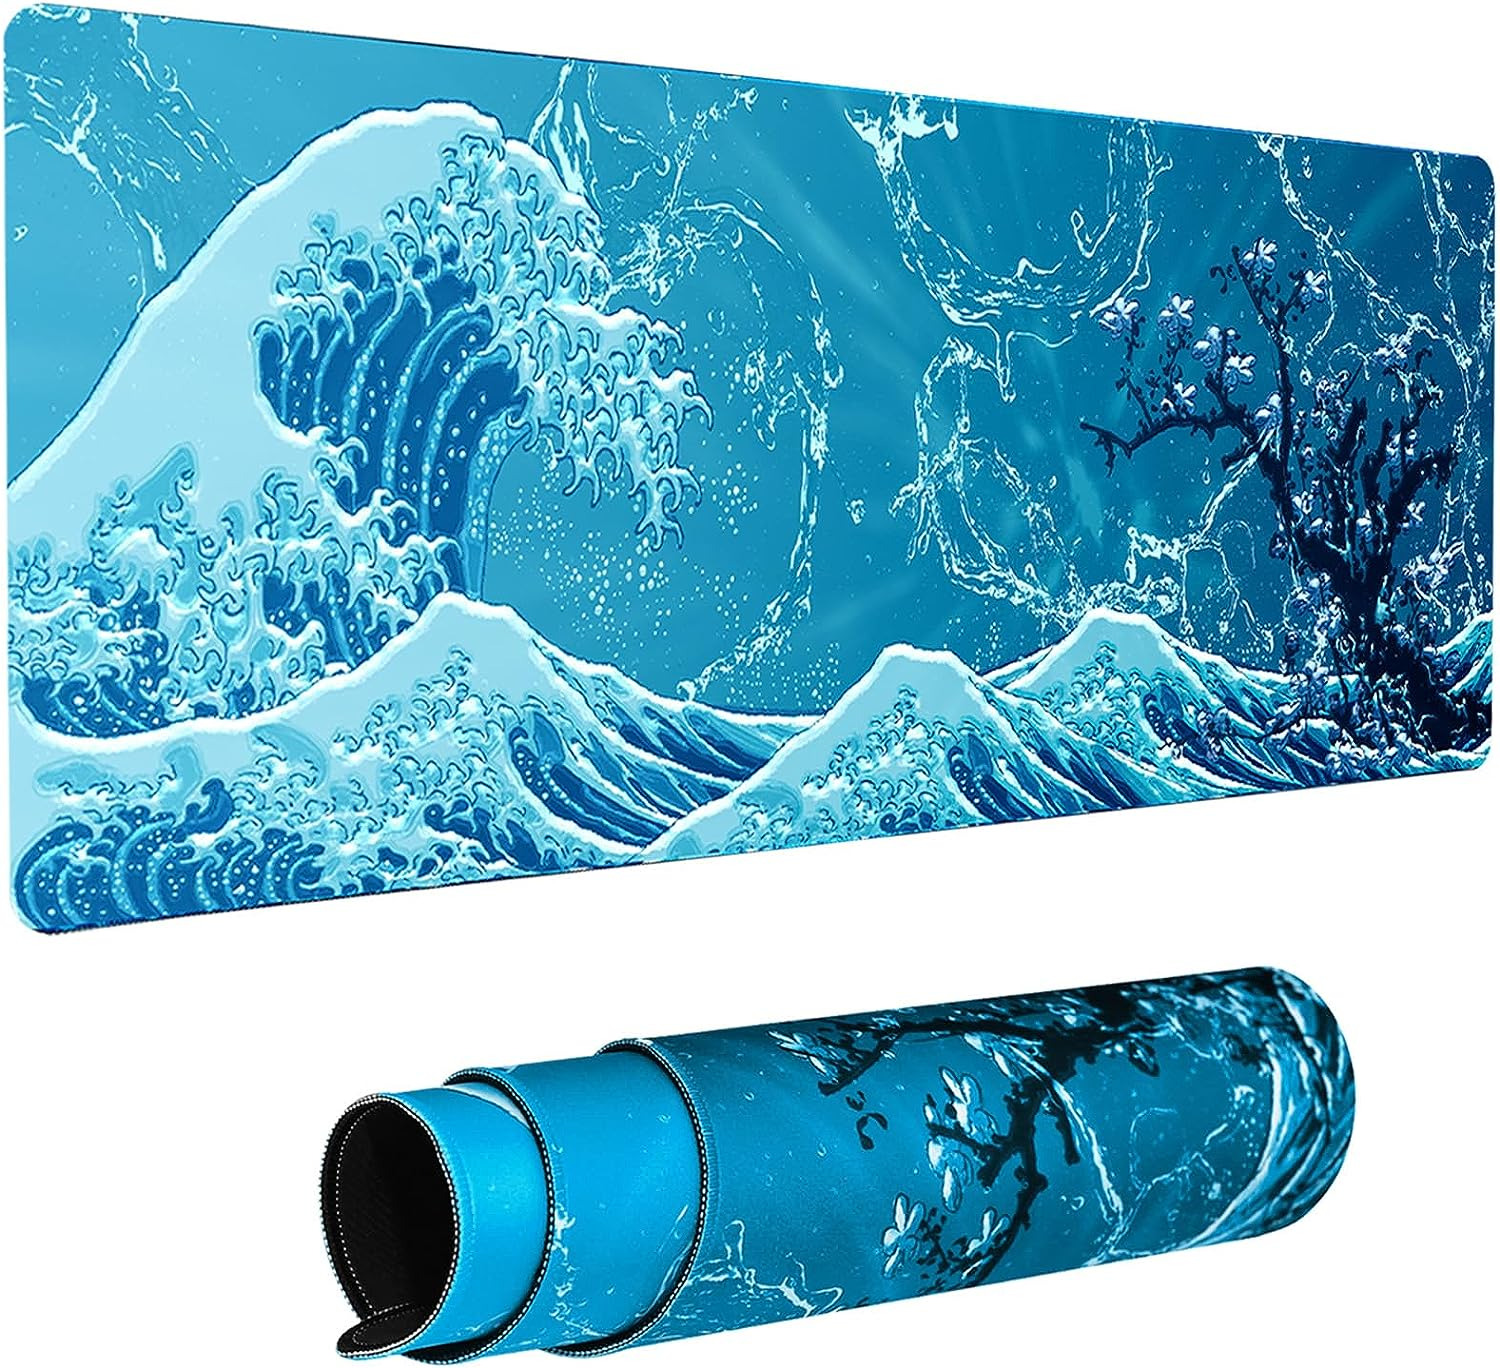 Japanese Sea Wave Extended Big Mouse Pad Large,XL Gaming Mouse Pad Desk Pad,31.5